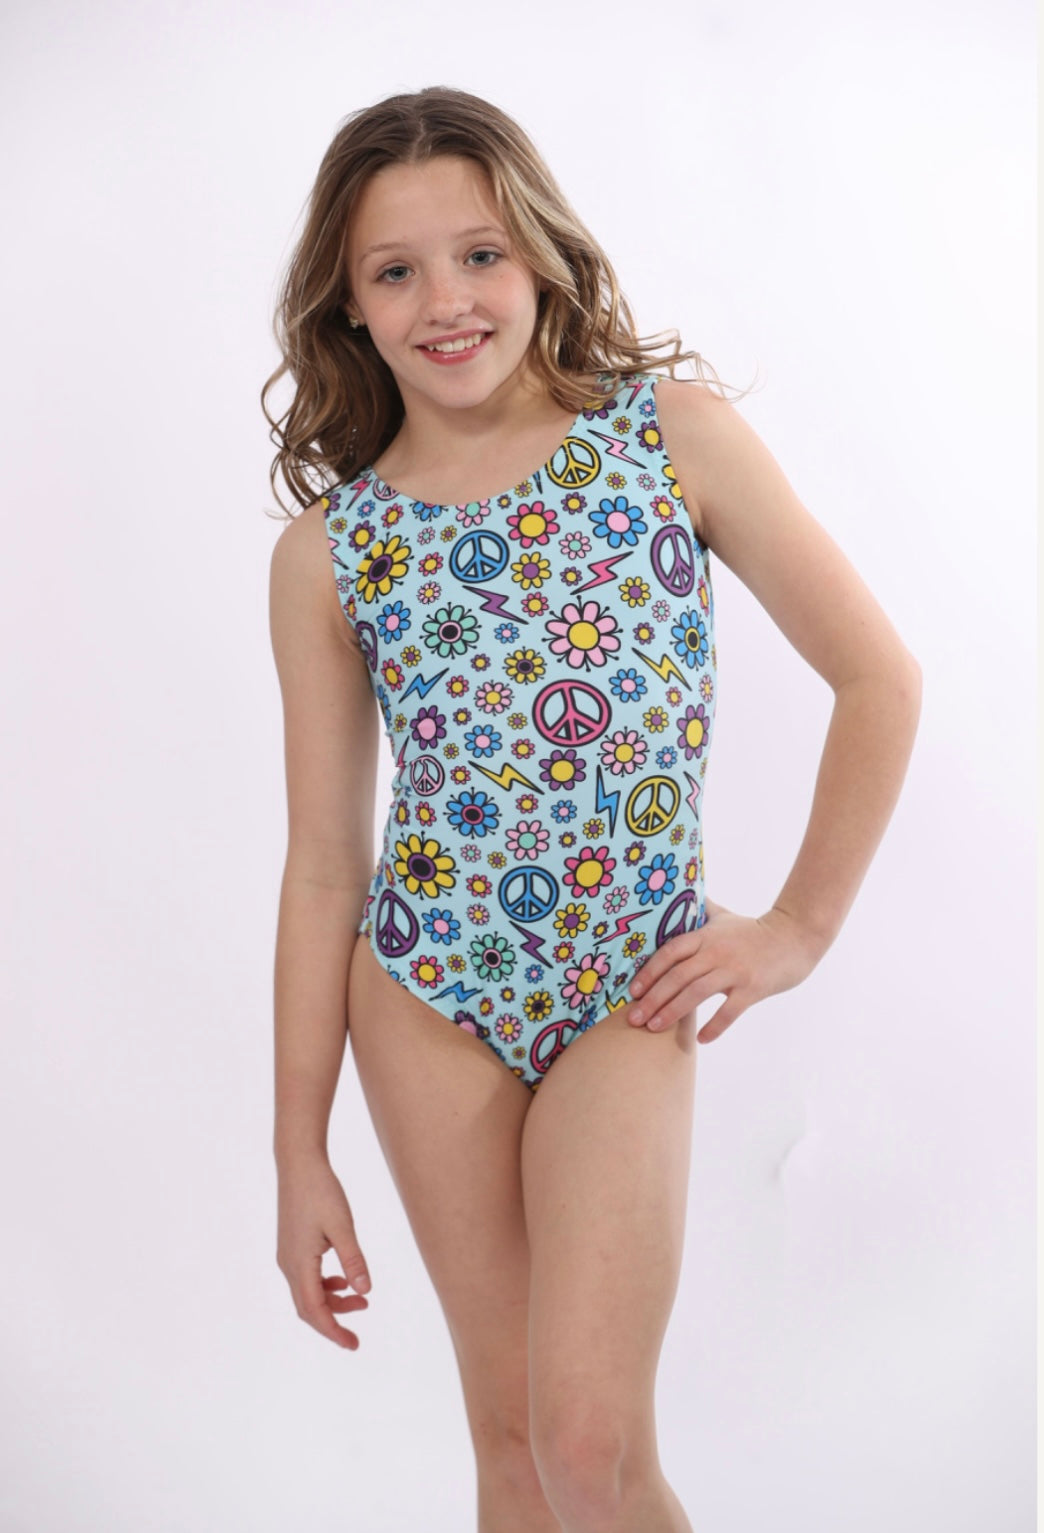 Light blue leotard with flowers and peace signs